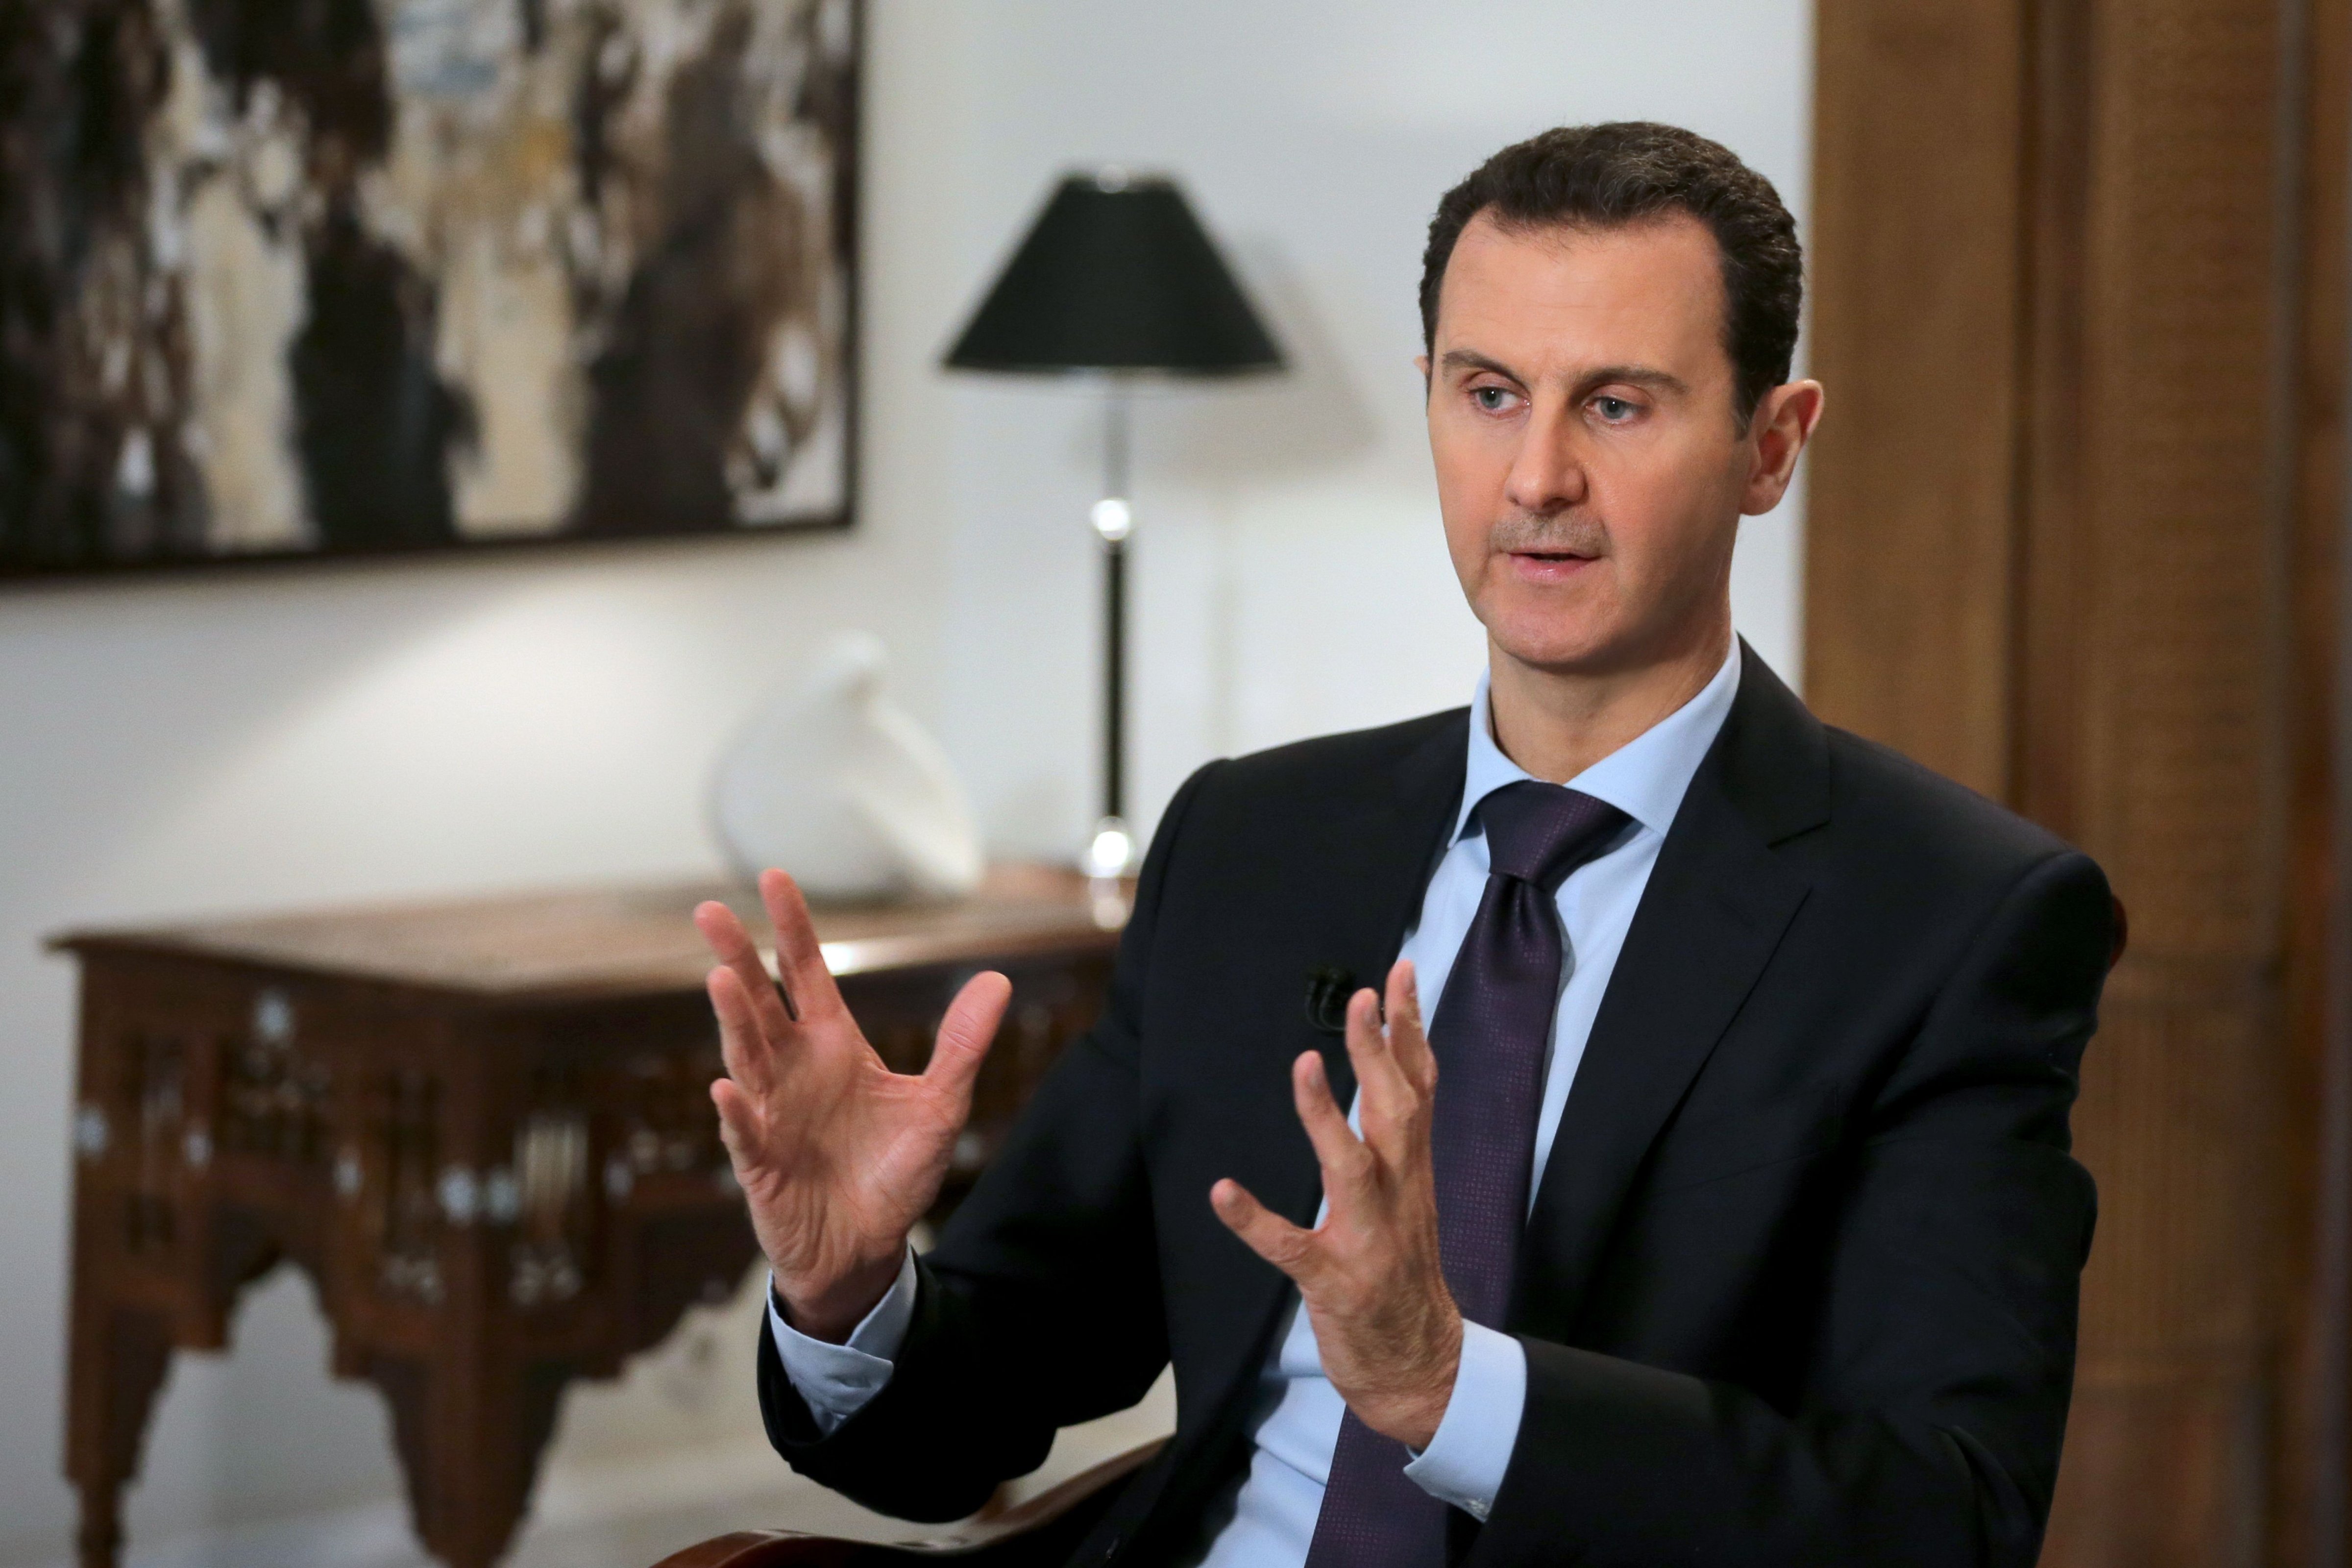 Syrian President Bashar al-Assad gestures during an interview in the capital Damascus on February 11, 2016. (JOSEPH EID—AFP/Getty Images)